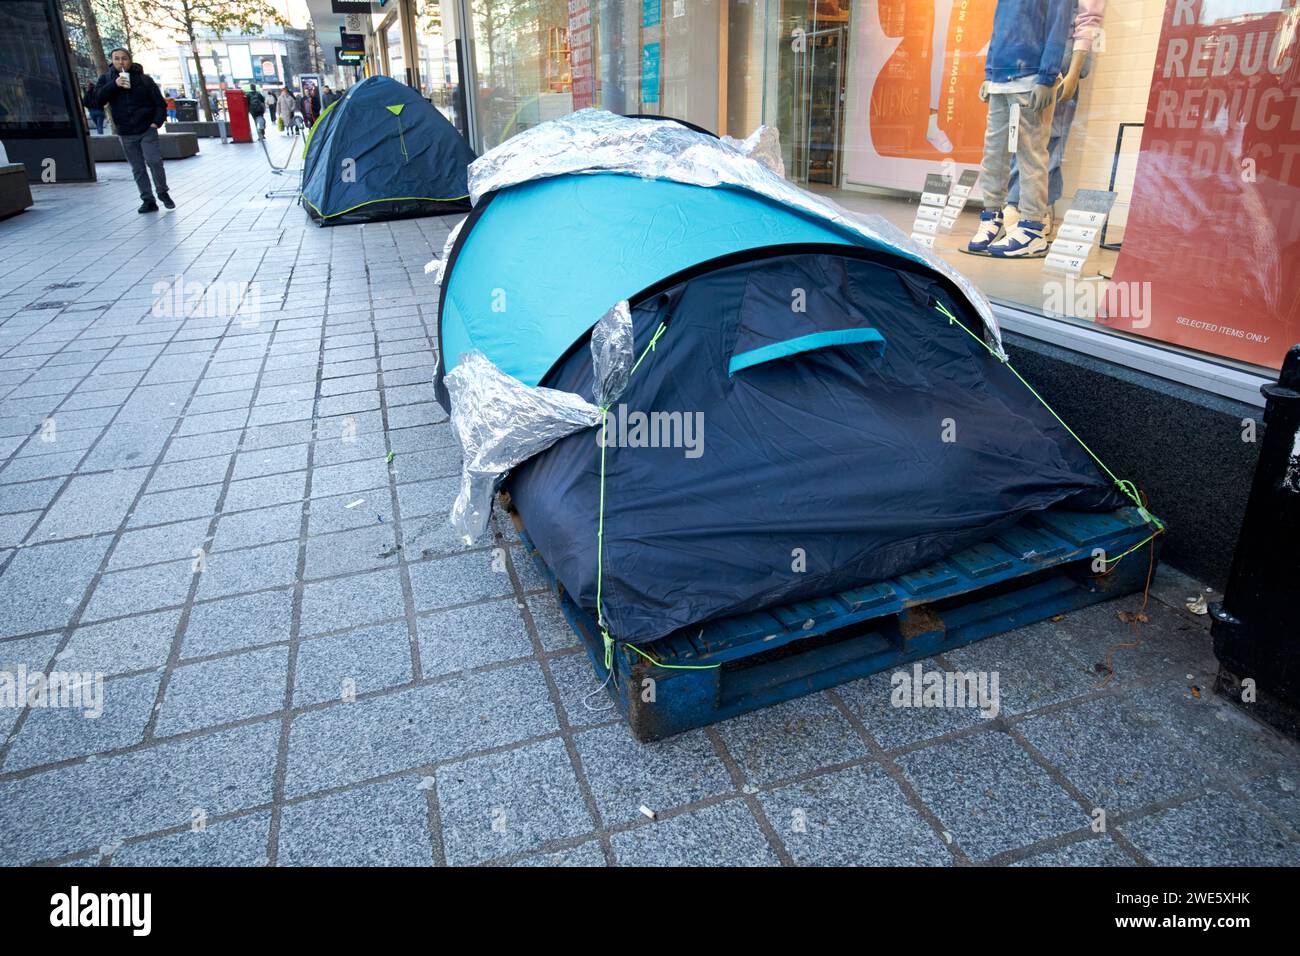 homeless people living rough in tents in the main pedestrian shopping street of church st liverpool, merseyside, england, uk Stock Photo